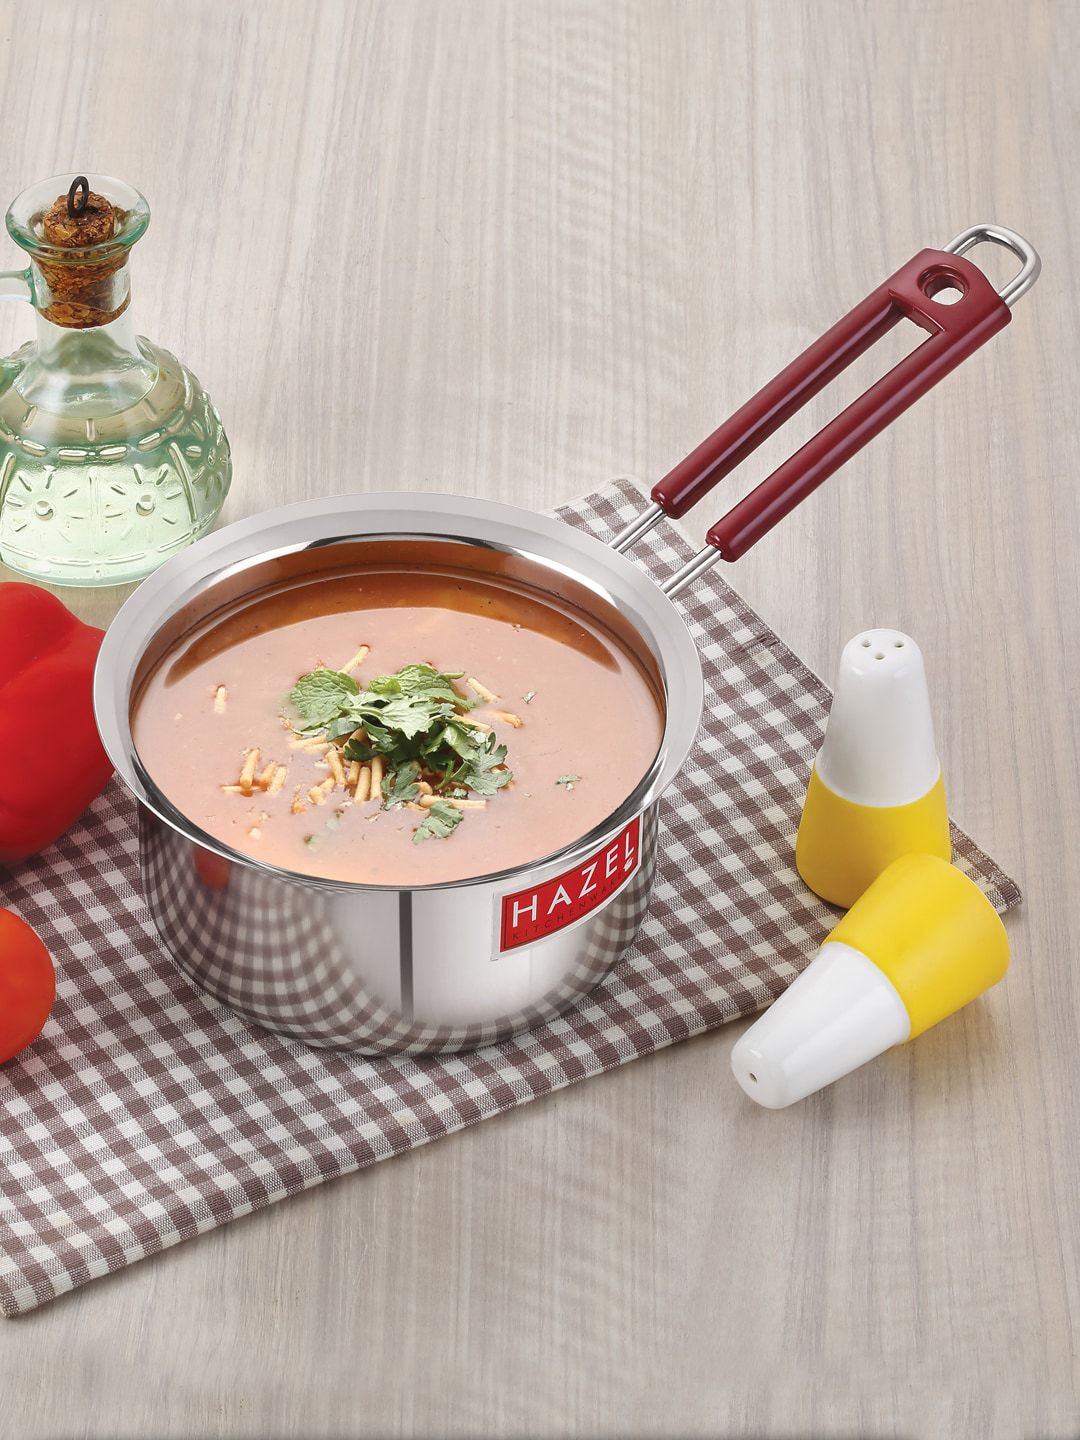 HAZEL Silver-Toned Stainless Steel Sauce Pan Price in India